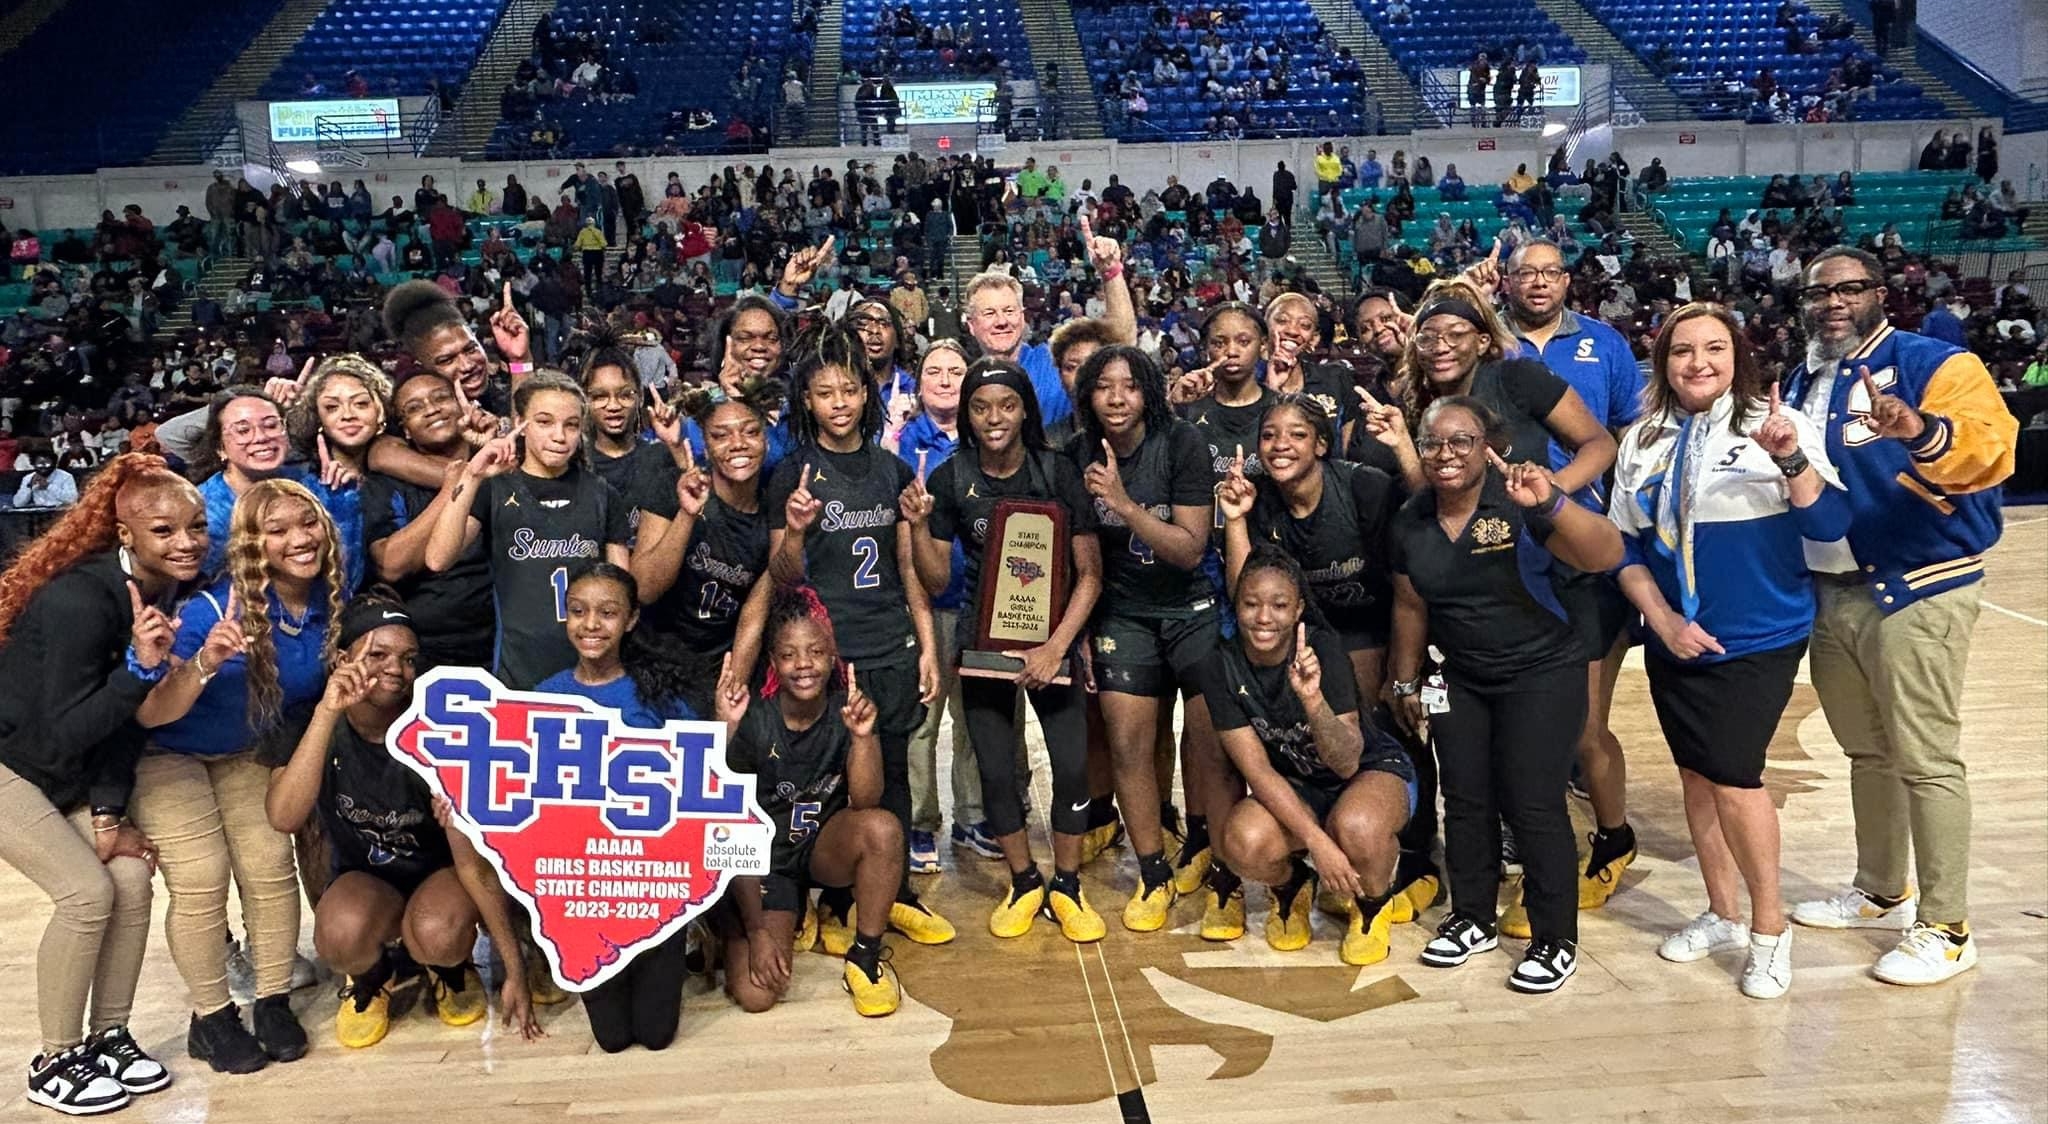 LADY GAMECOCKS WIN STATE! - Content Image for sumterhs_bigteams_3836